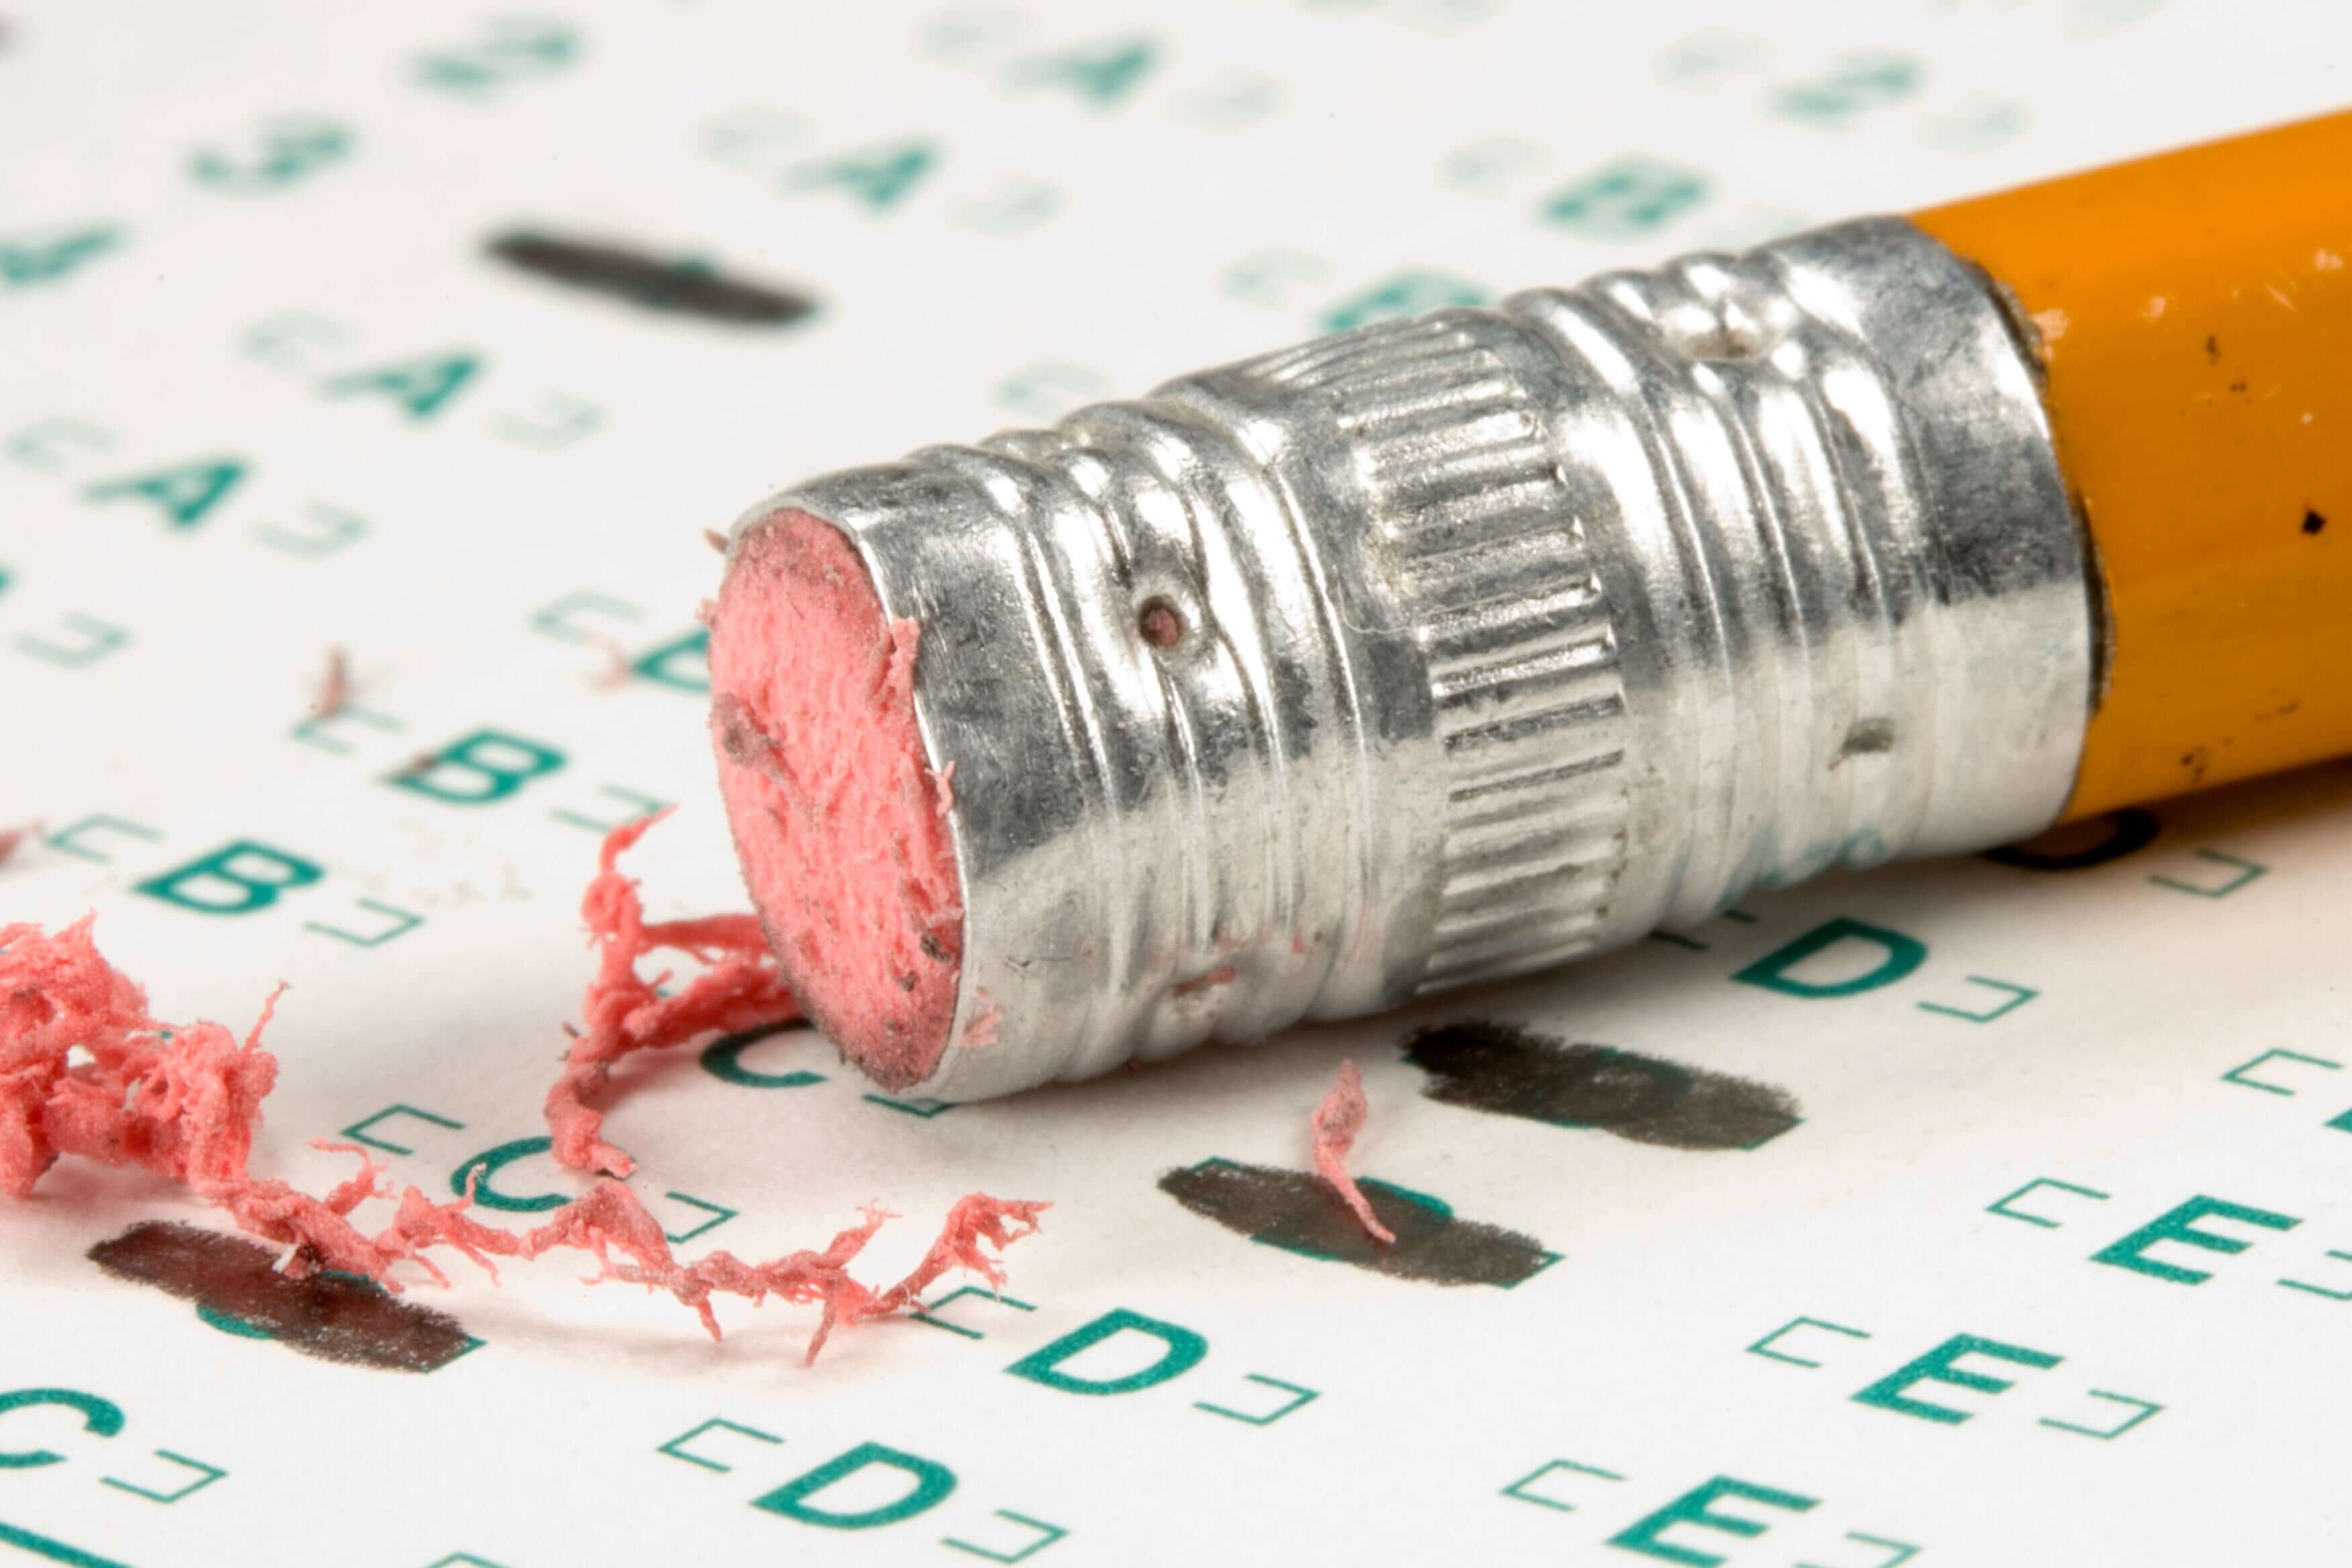 Standardized Testing A Useful Or Misused Tool?